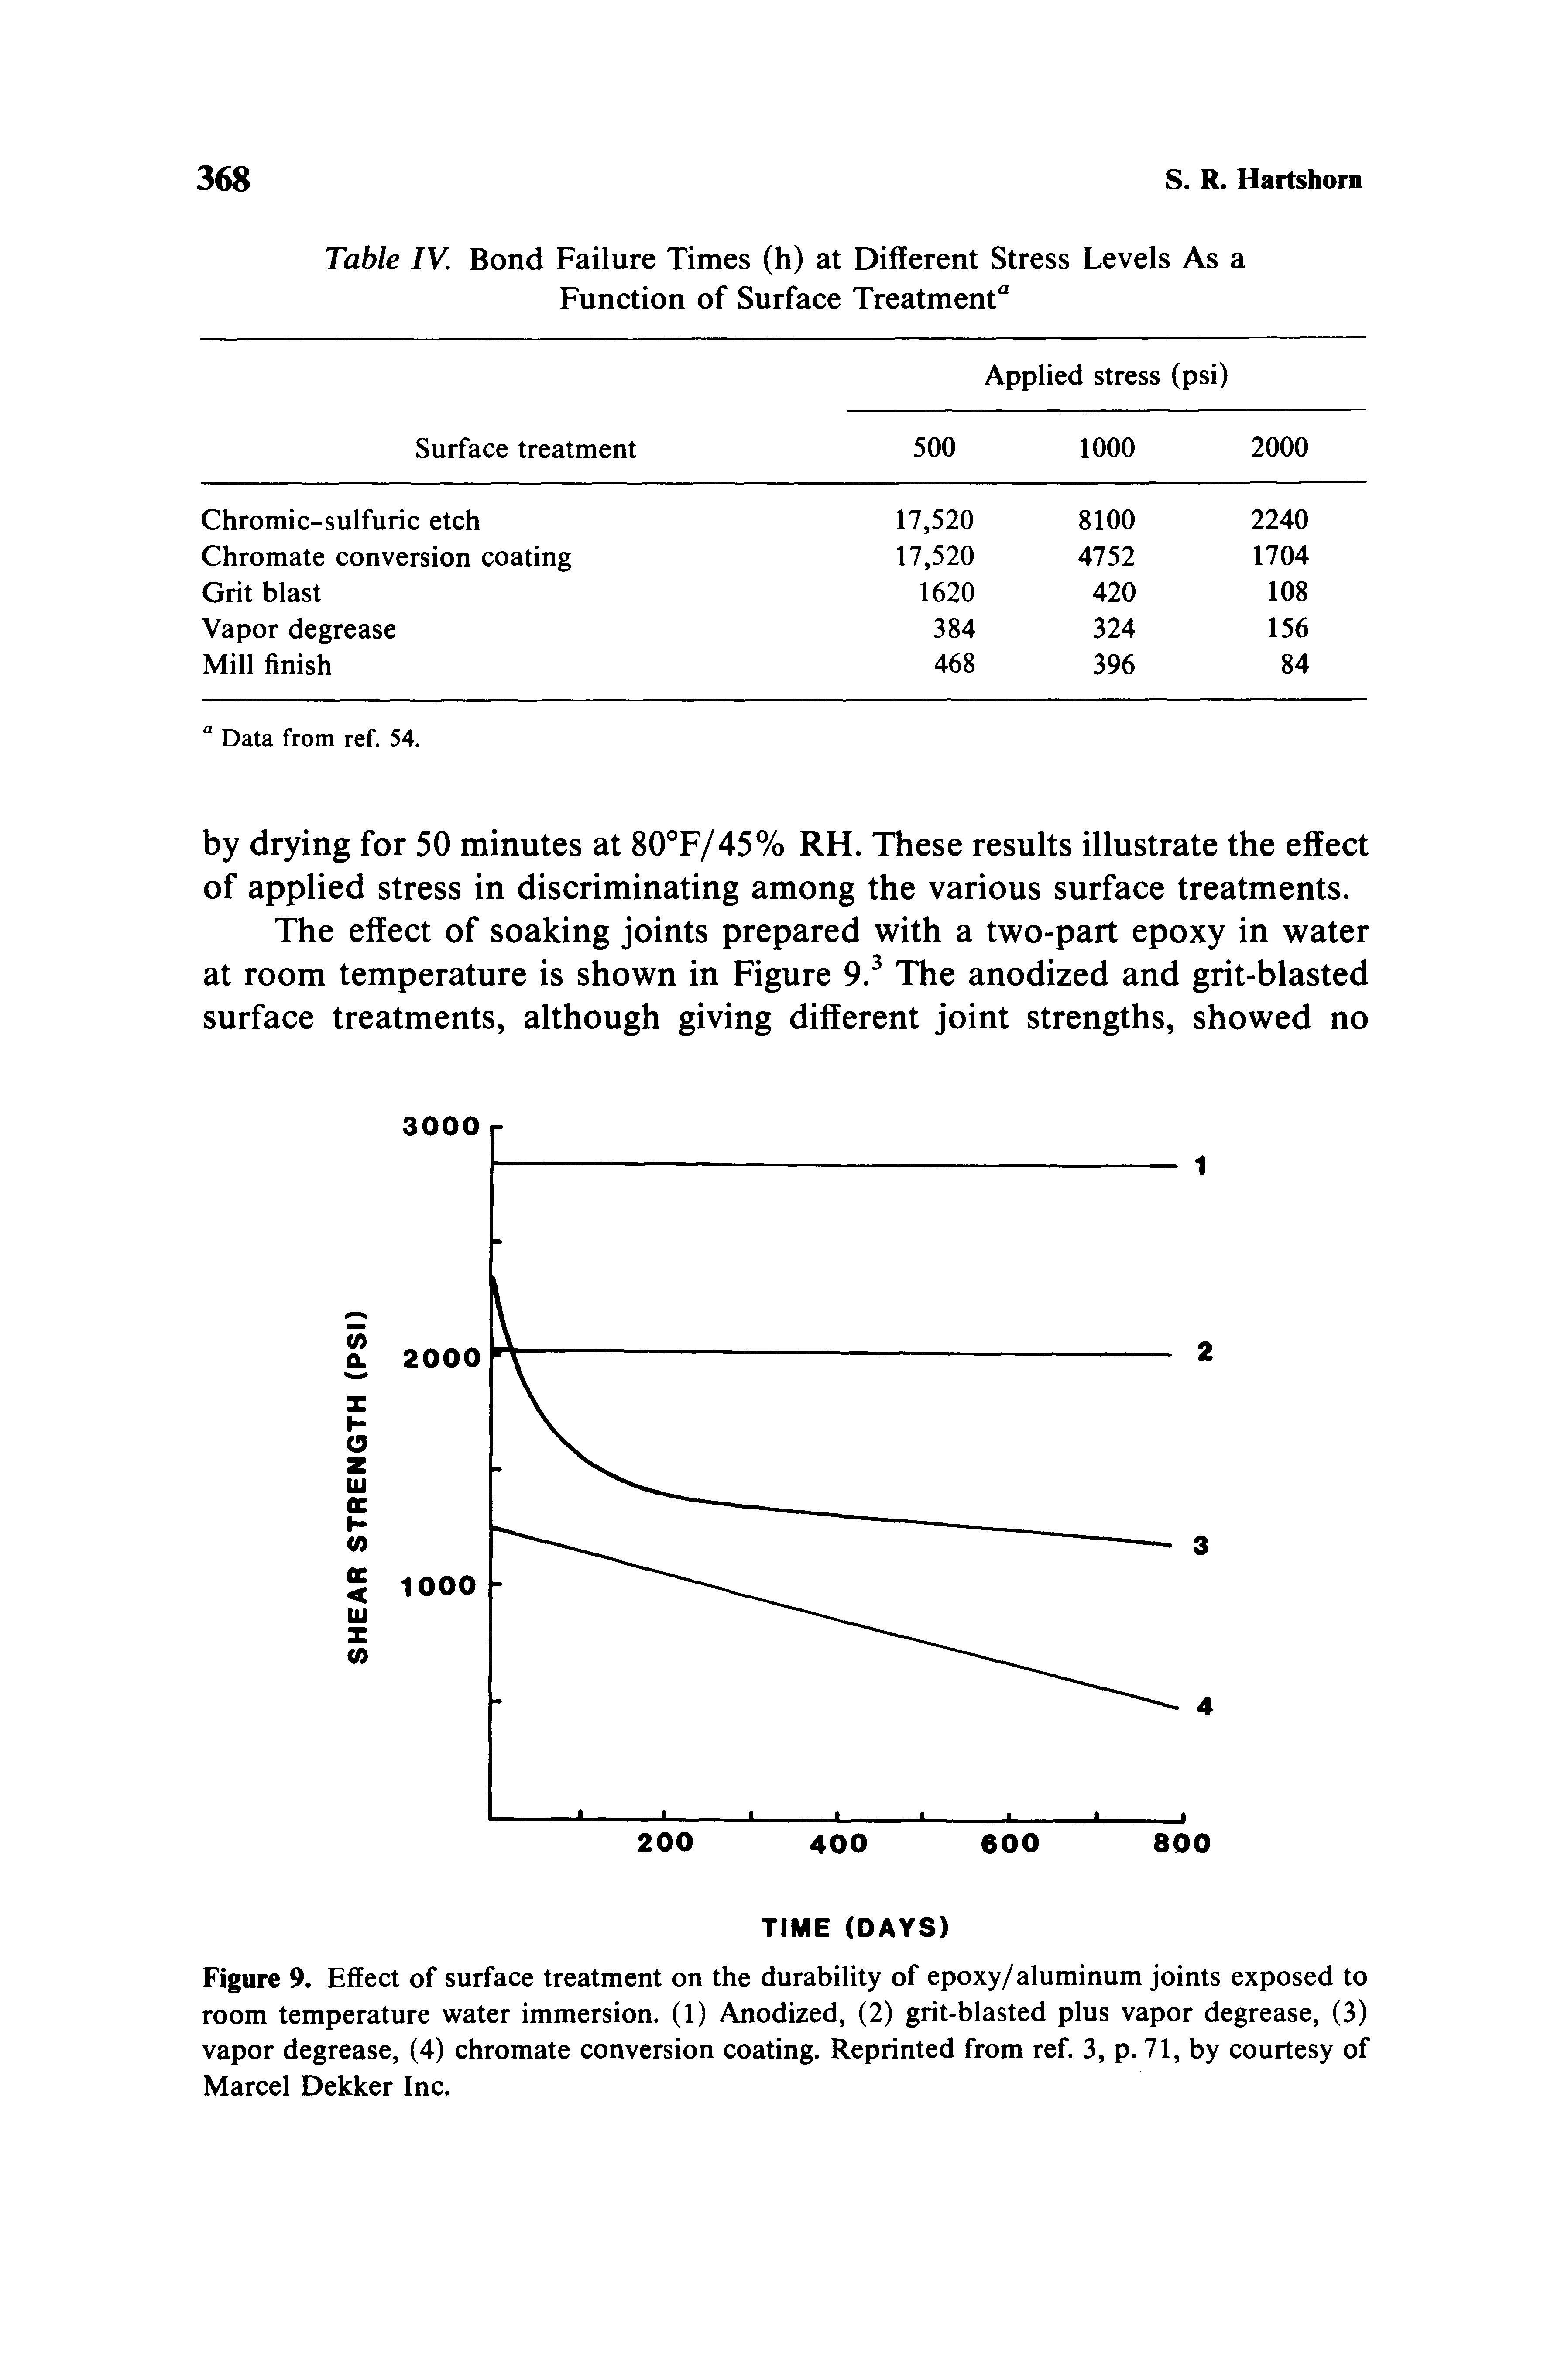 Figure 9. Effect of surface treatment on the durability of epoxy/aluminum joints exposed to room temperature water immersion. (1) Anodized, (2) grit-blasted plus vapor degrease, (3) vapor degrease, (4) chromate conversion coating. Reprinted from ref. 3, p. 71, by courtesy of Marcel Dekker Inc.